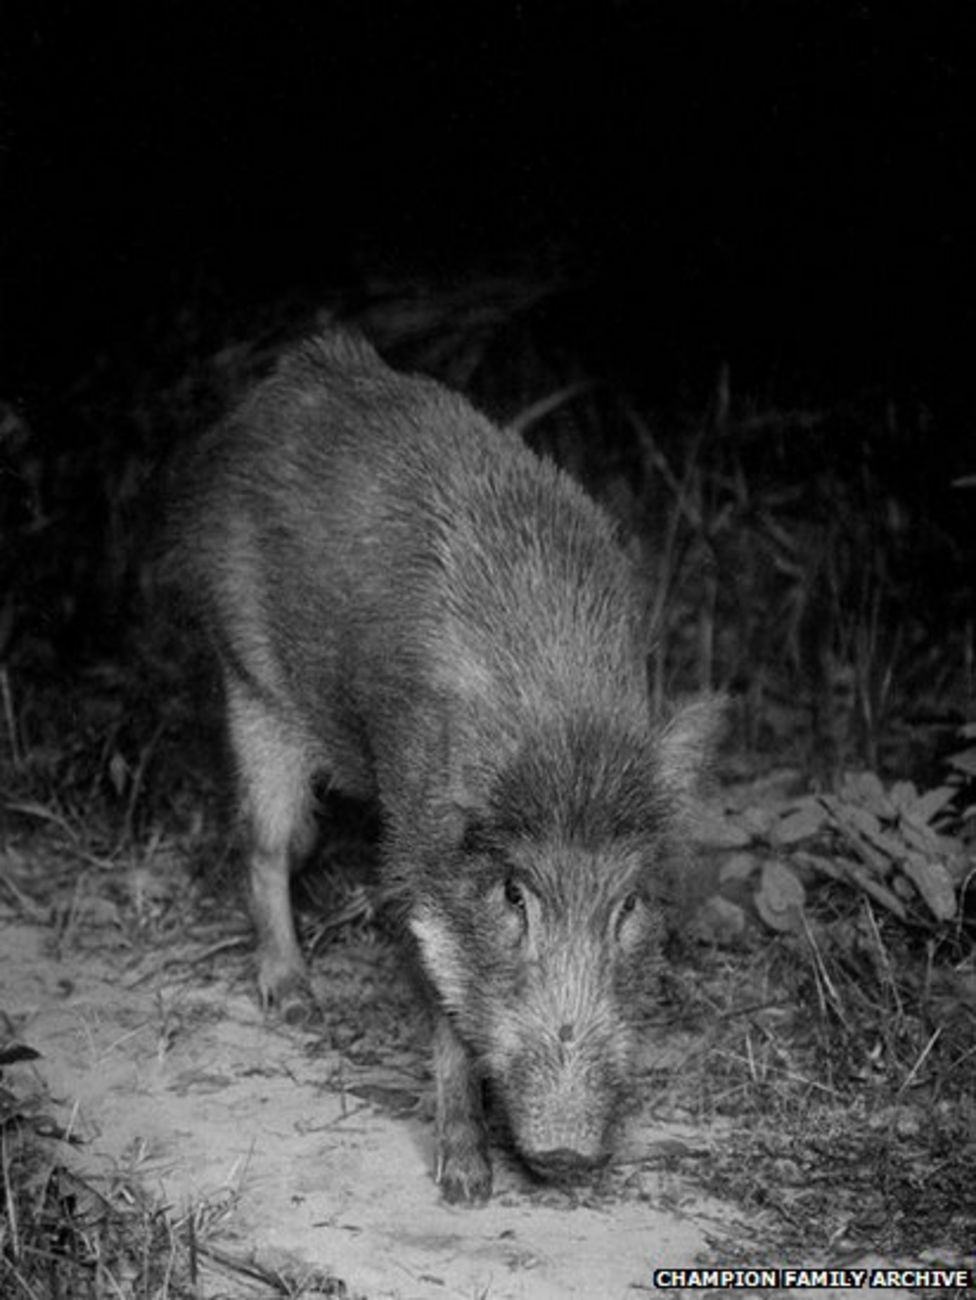 A picture by the photographer of a Wild pig - one of the tiger’s favourite prey and sometimes triggered the camera.